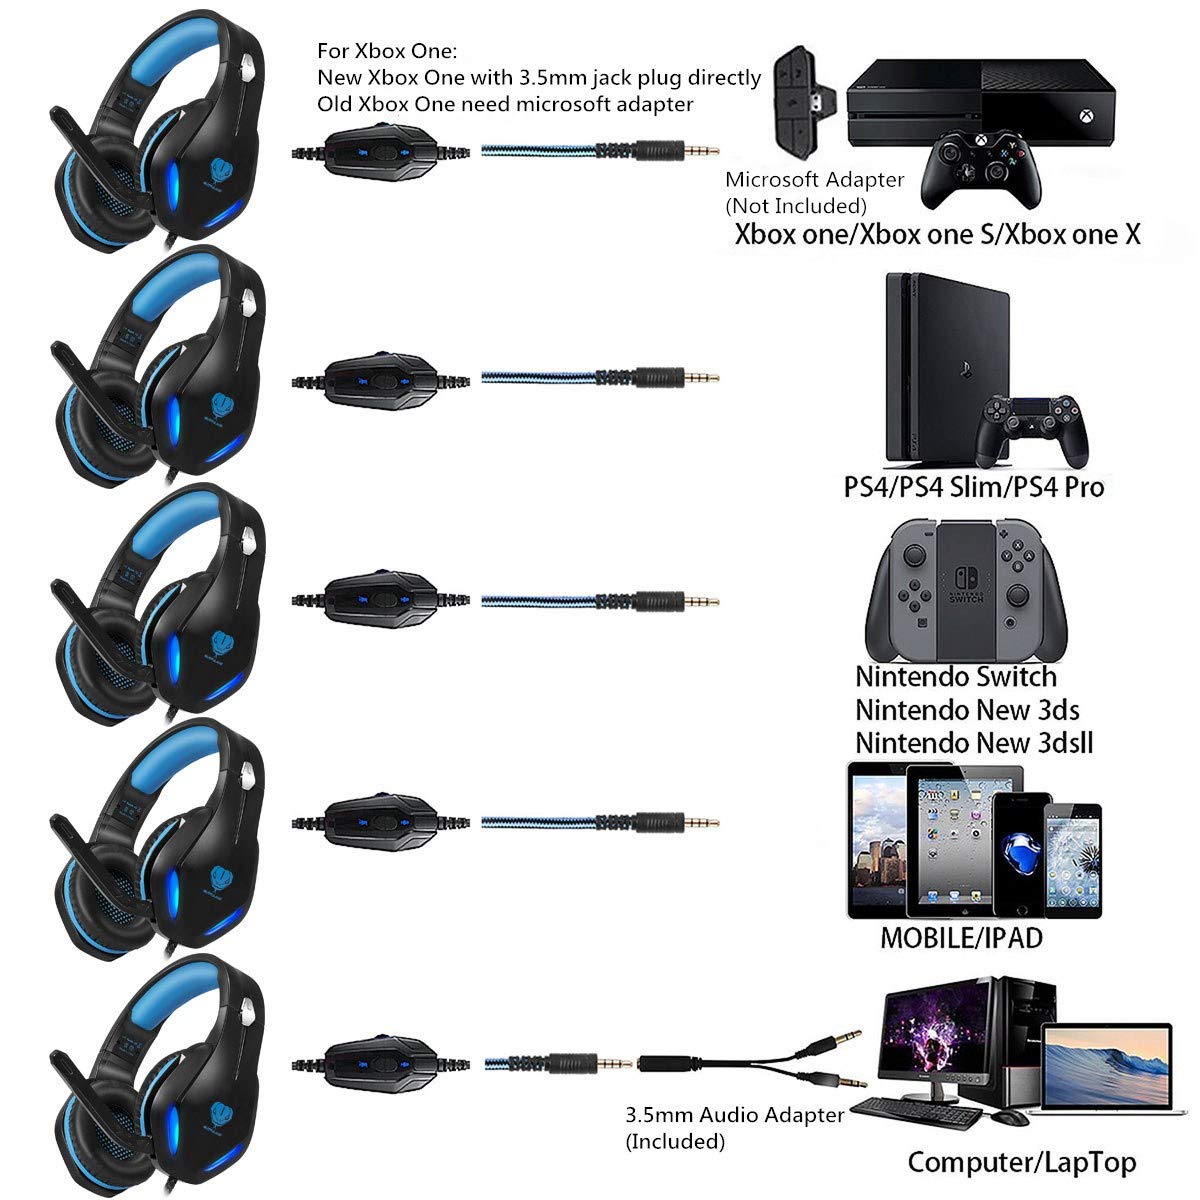 Headsets for Xbox One, PS4, PC, Nintendo Switch, Mac, Gaming Headset with Stereo Surround Sound, Over Ear Gaming Headphones with Noise Canceling Mic, LED Light (Headsets for Xbox/Blue)